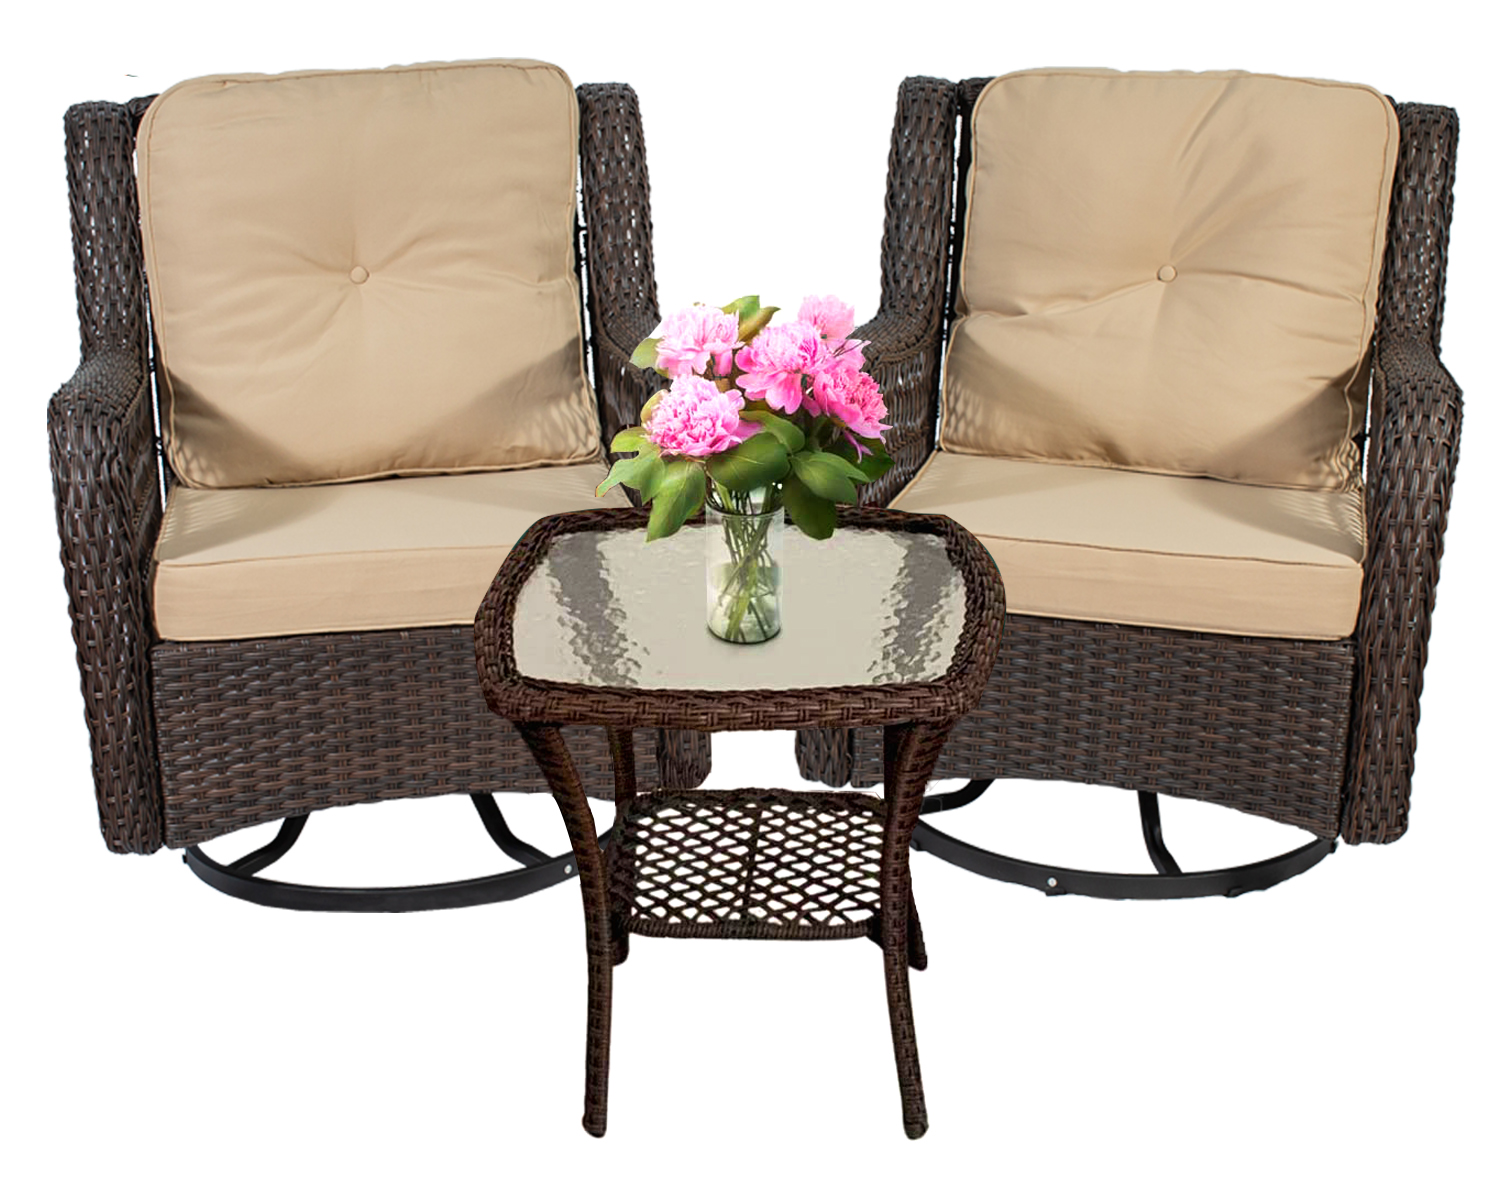 Outdoor Swivel Patio Lounge Chairs 3-Piece Patio Conversation Bistro Set w/Wicker Patio Chairs and Side Table for Small Space Deck Porch 350 LBS Beige - image 1 of 13